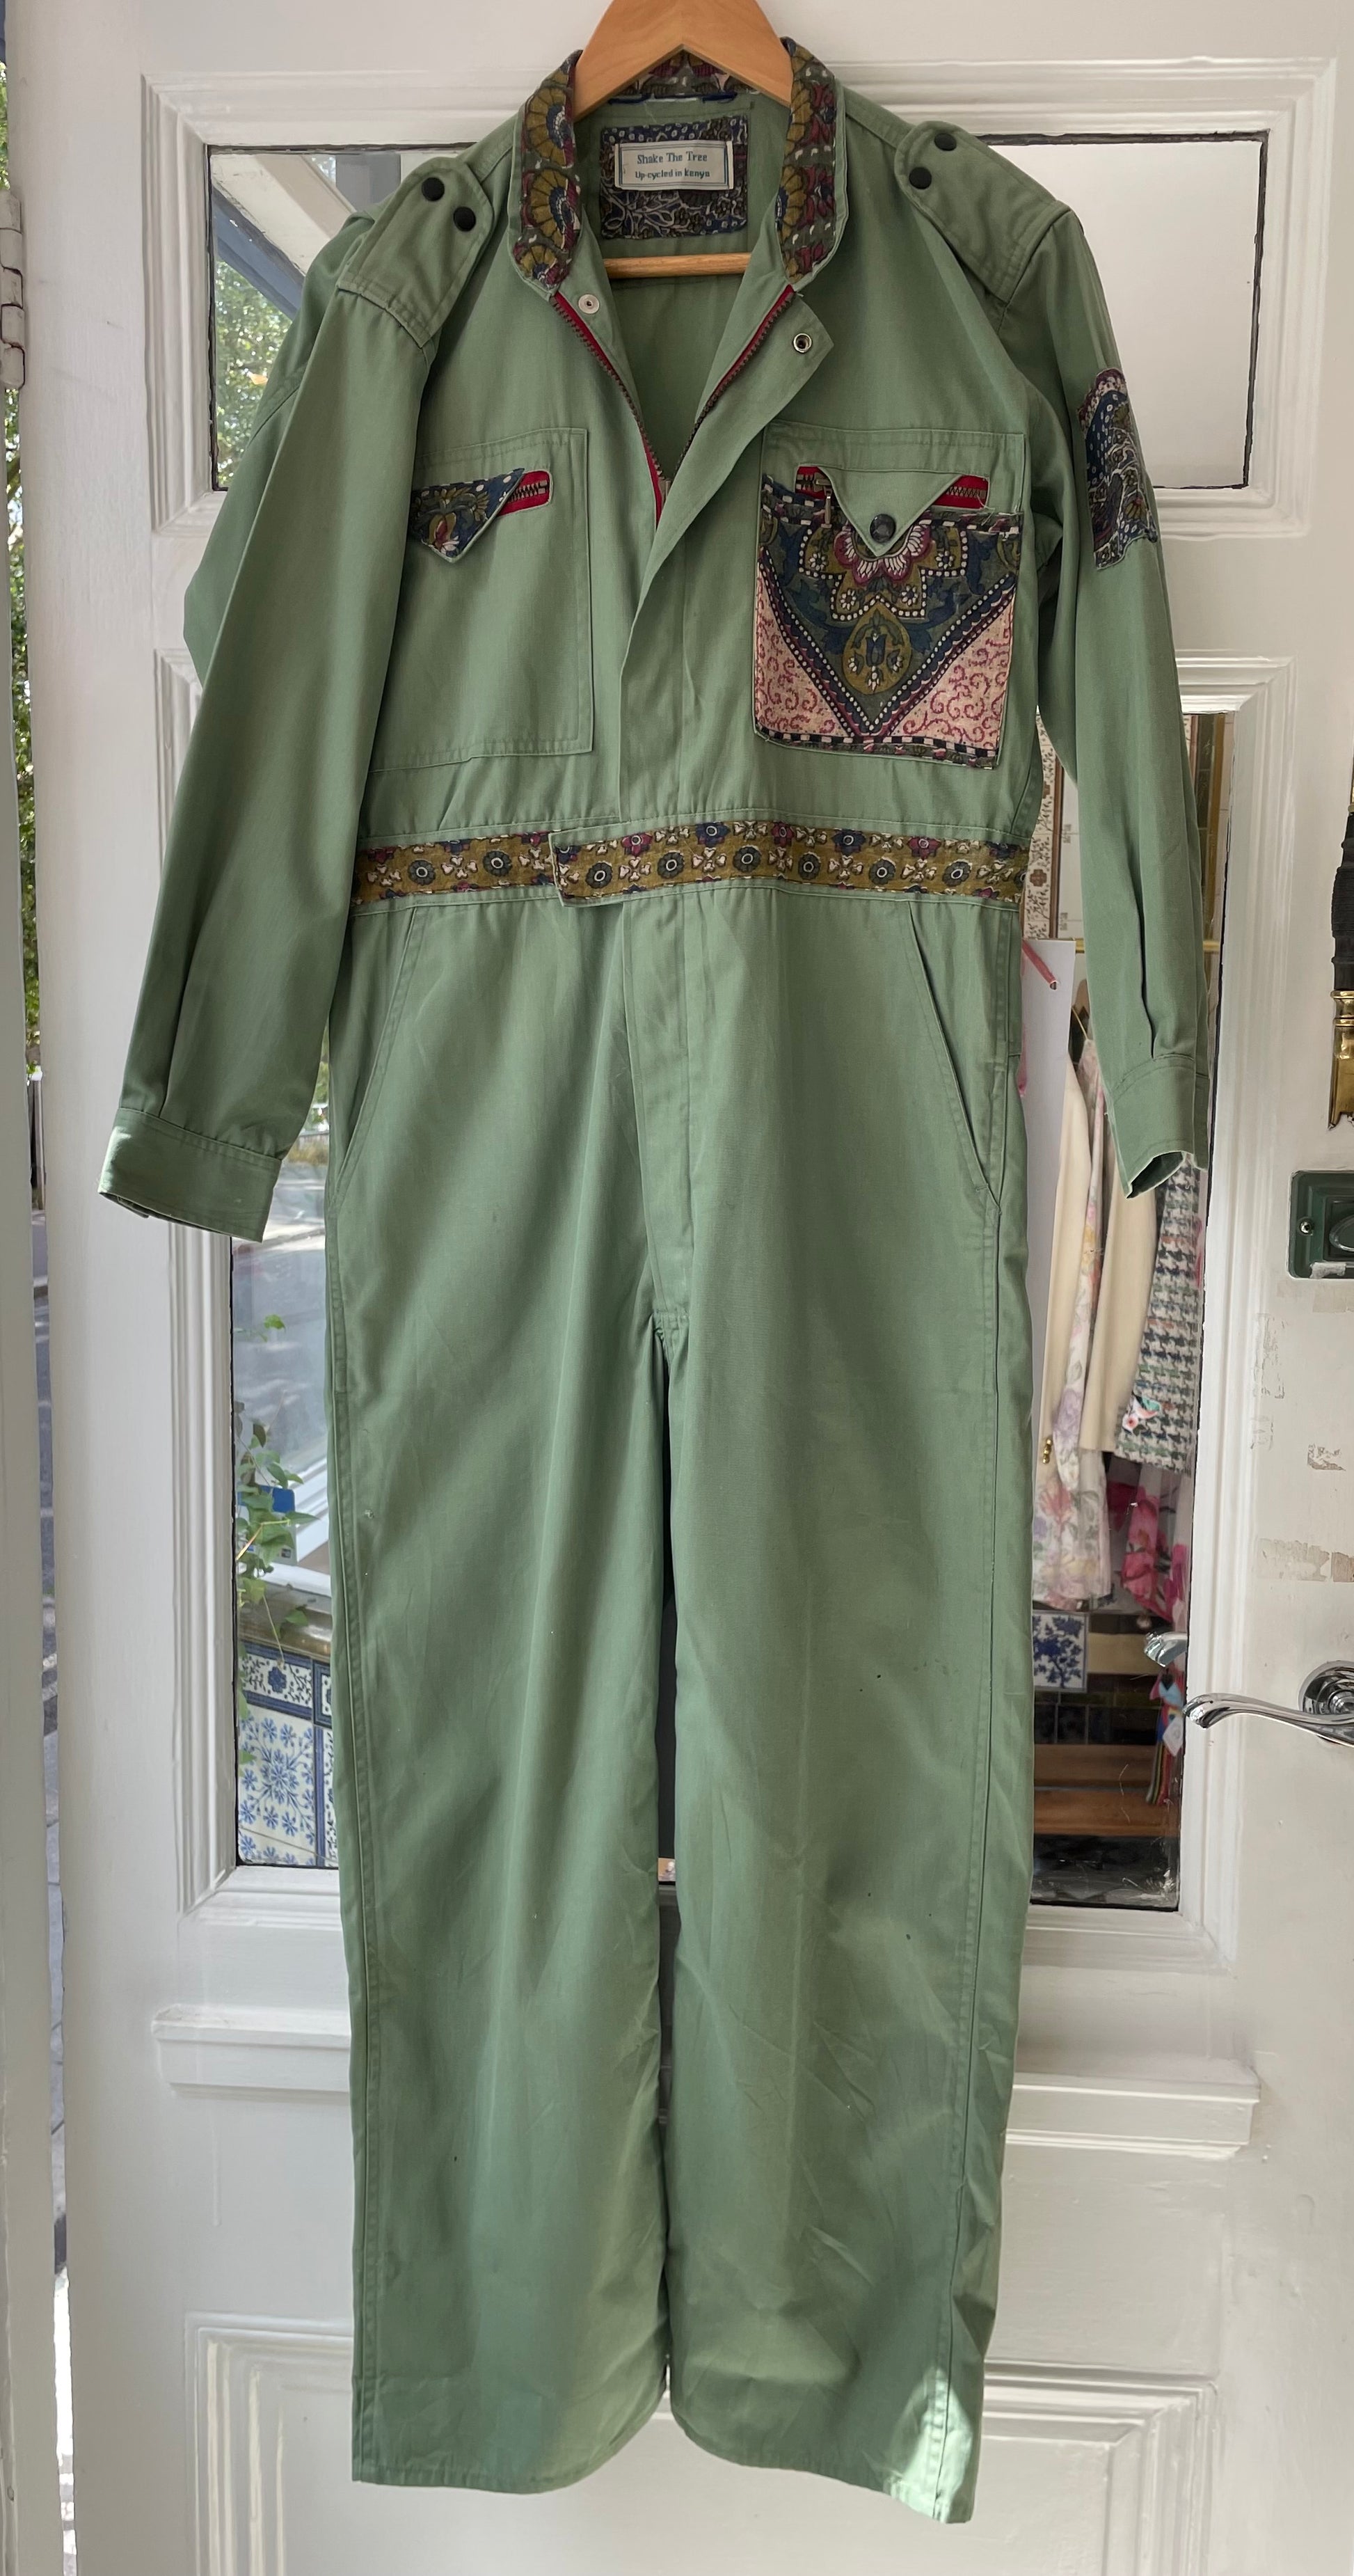 An Upcycled Boiler Suit from mpira.